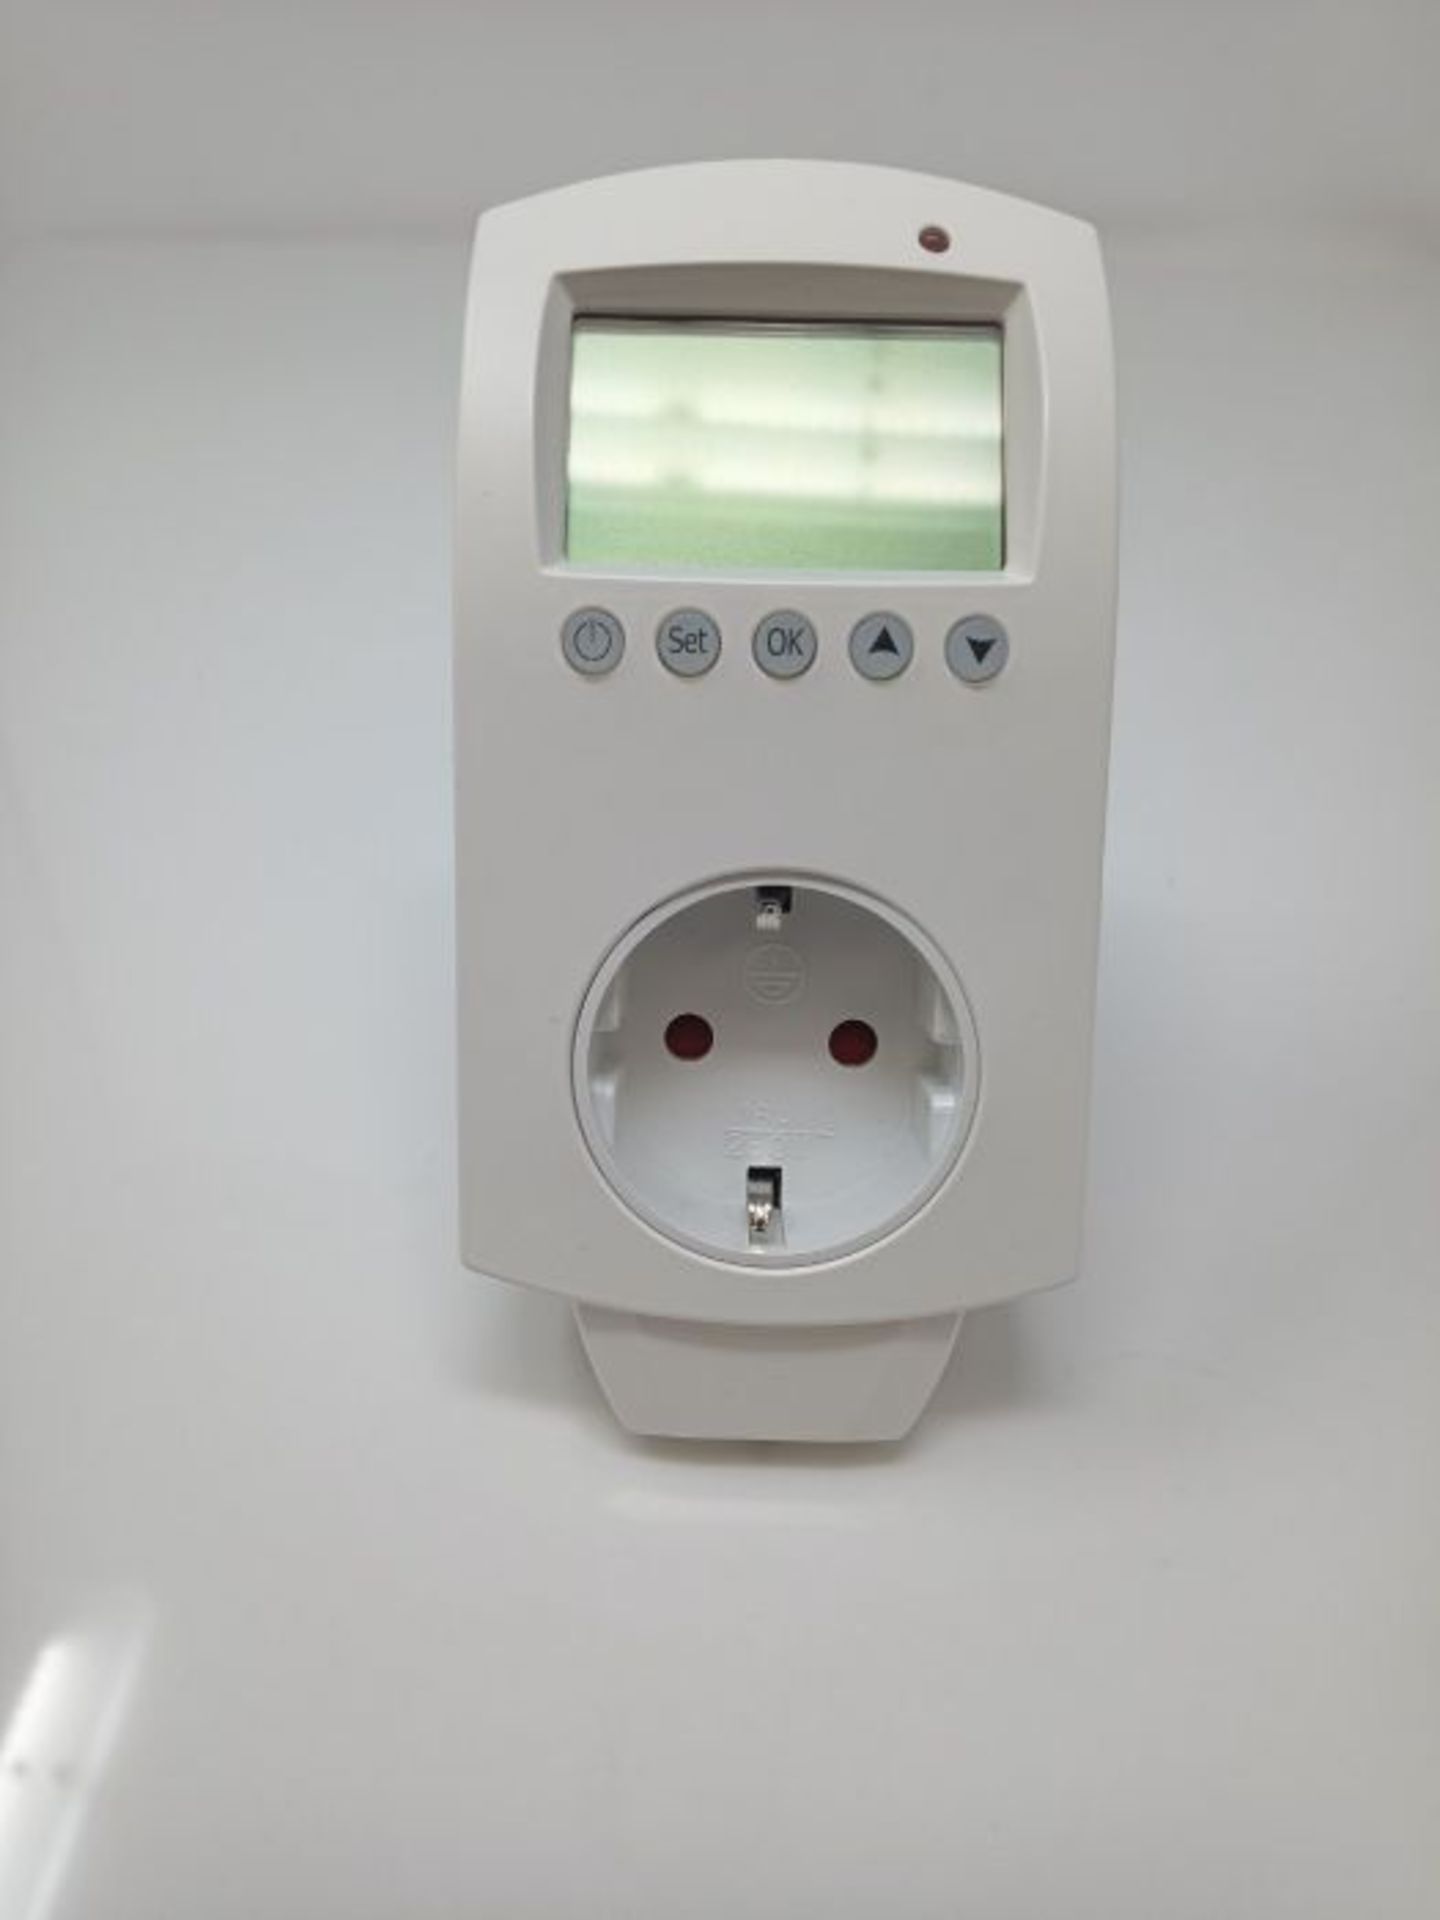 CSL-Computer Digital Thermostat for Heaters Infrared Heaters with Frost Guard Backup B - Image 2 of 2